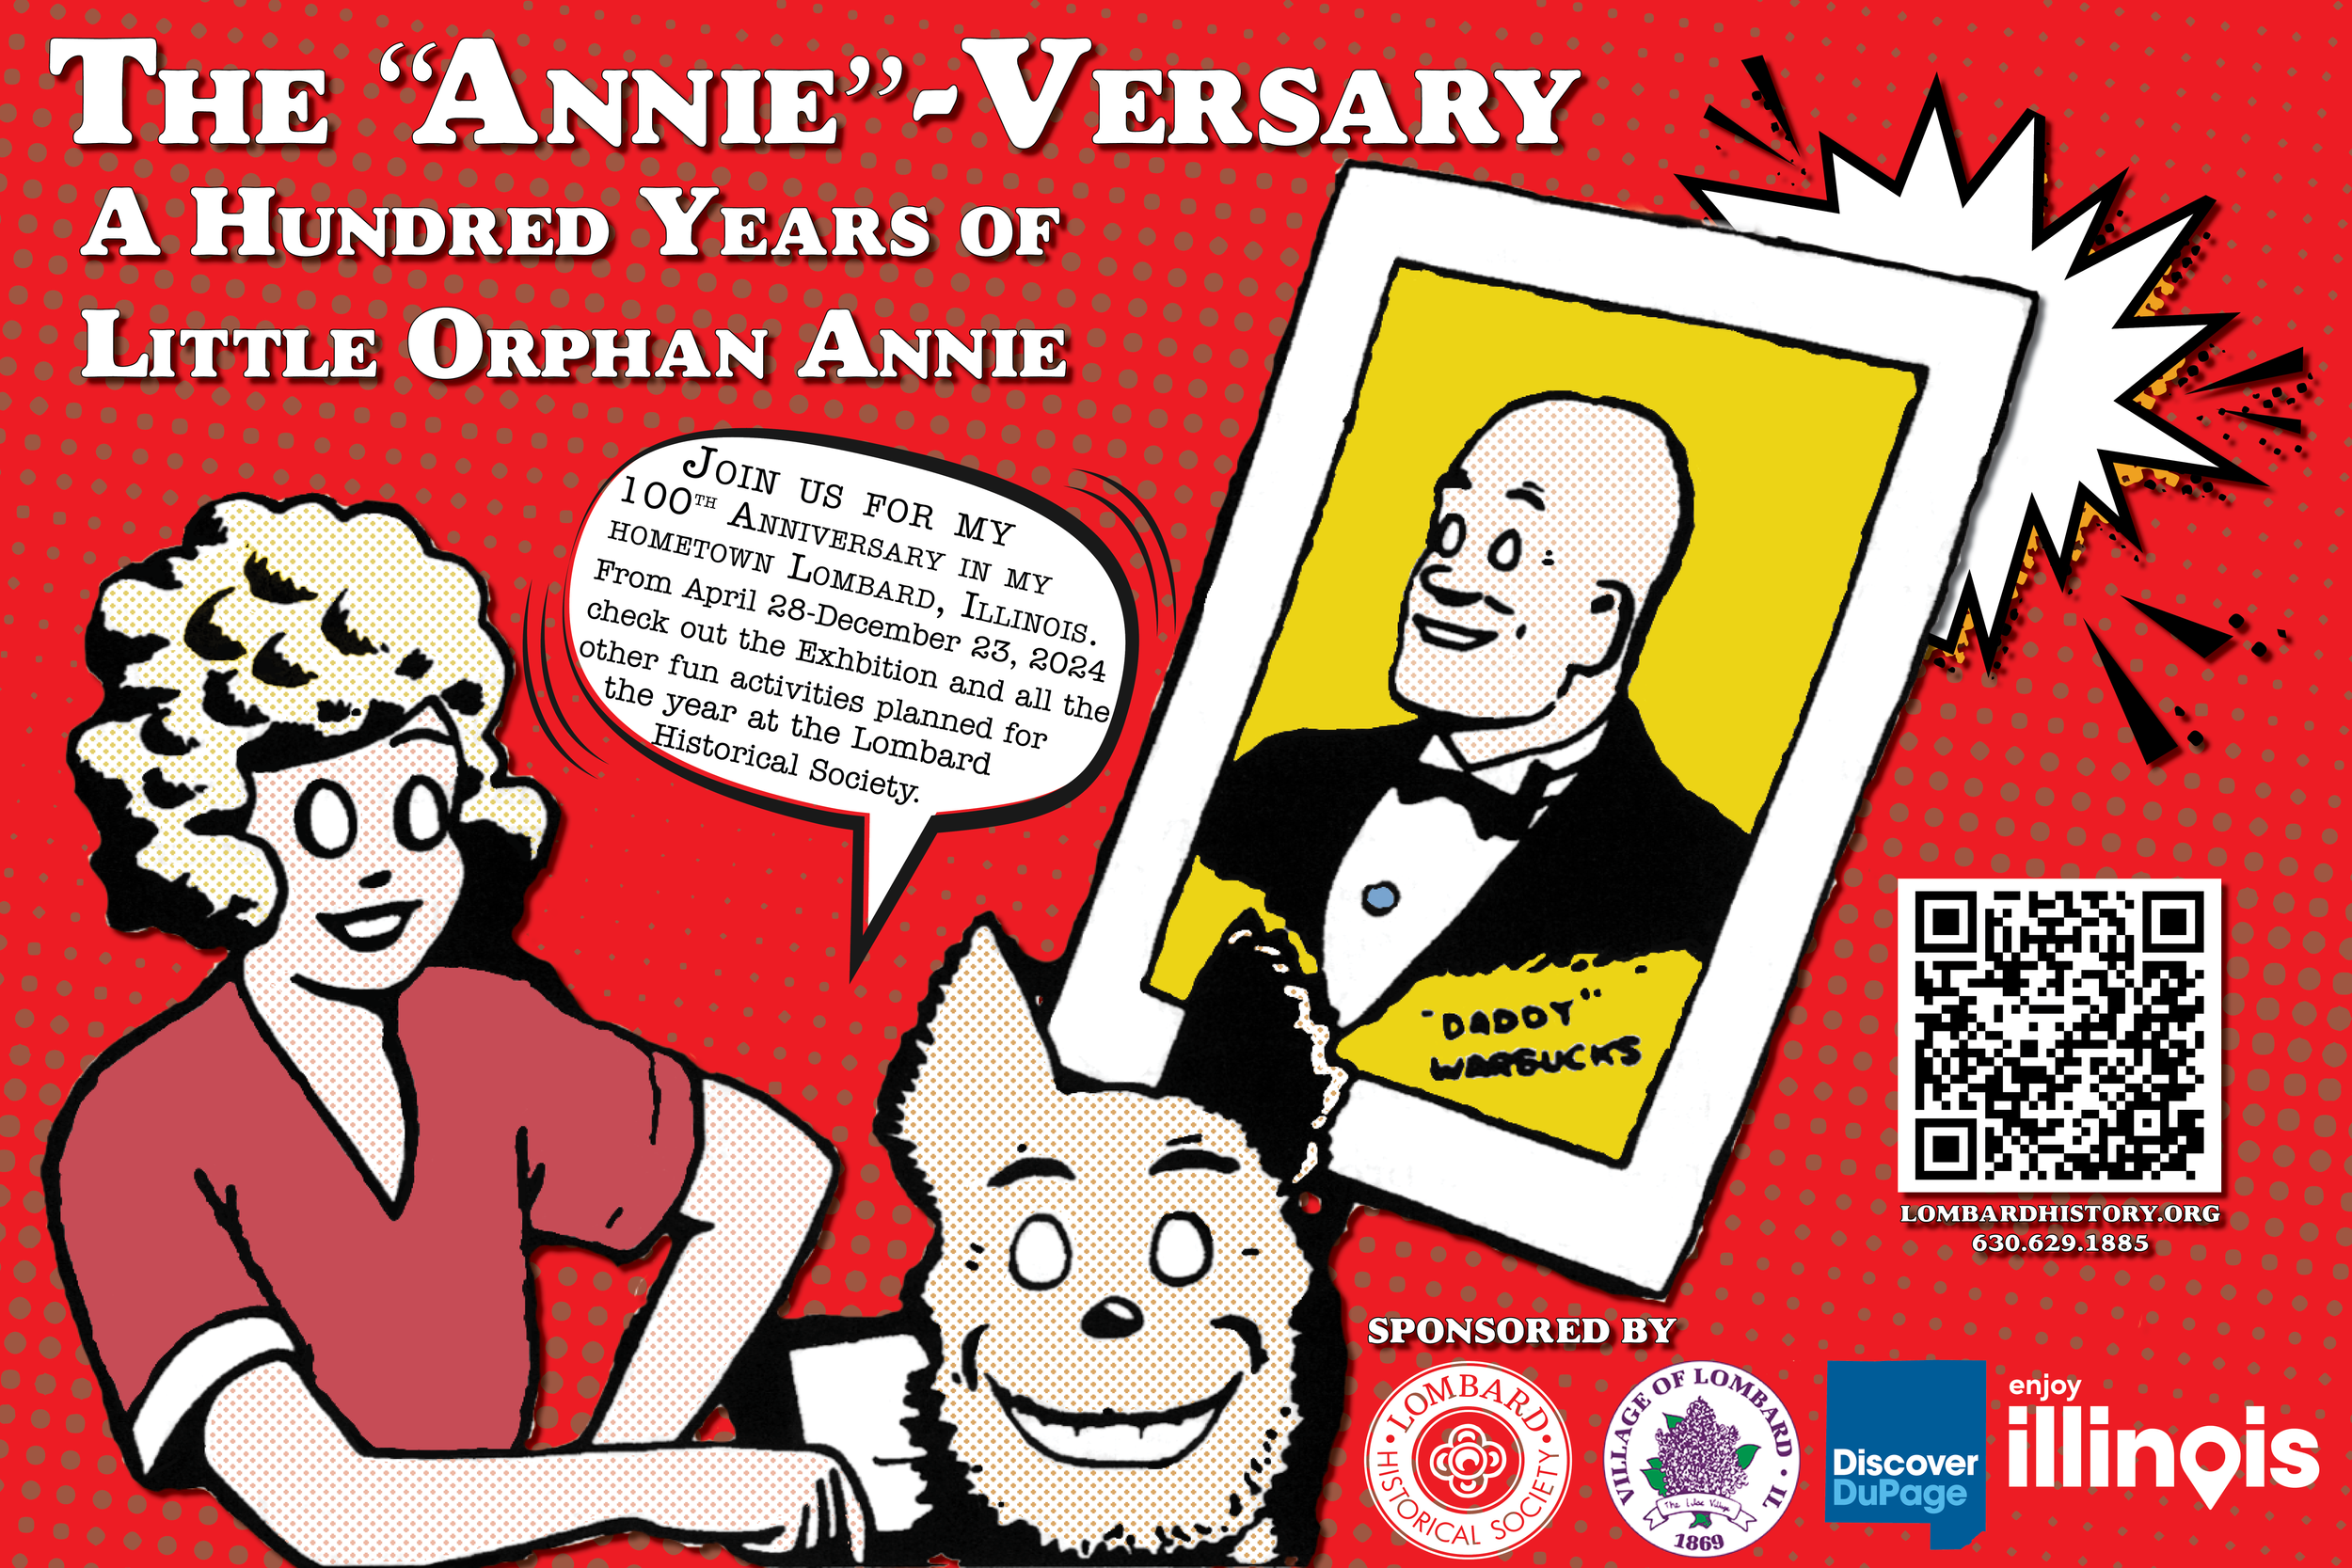 Annie-Versary Advertisment OUTLINE.png